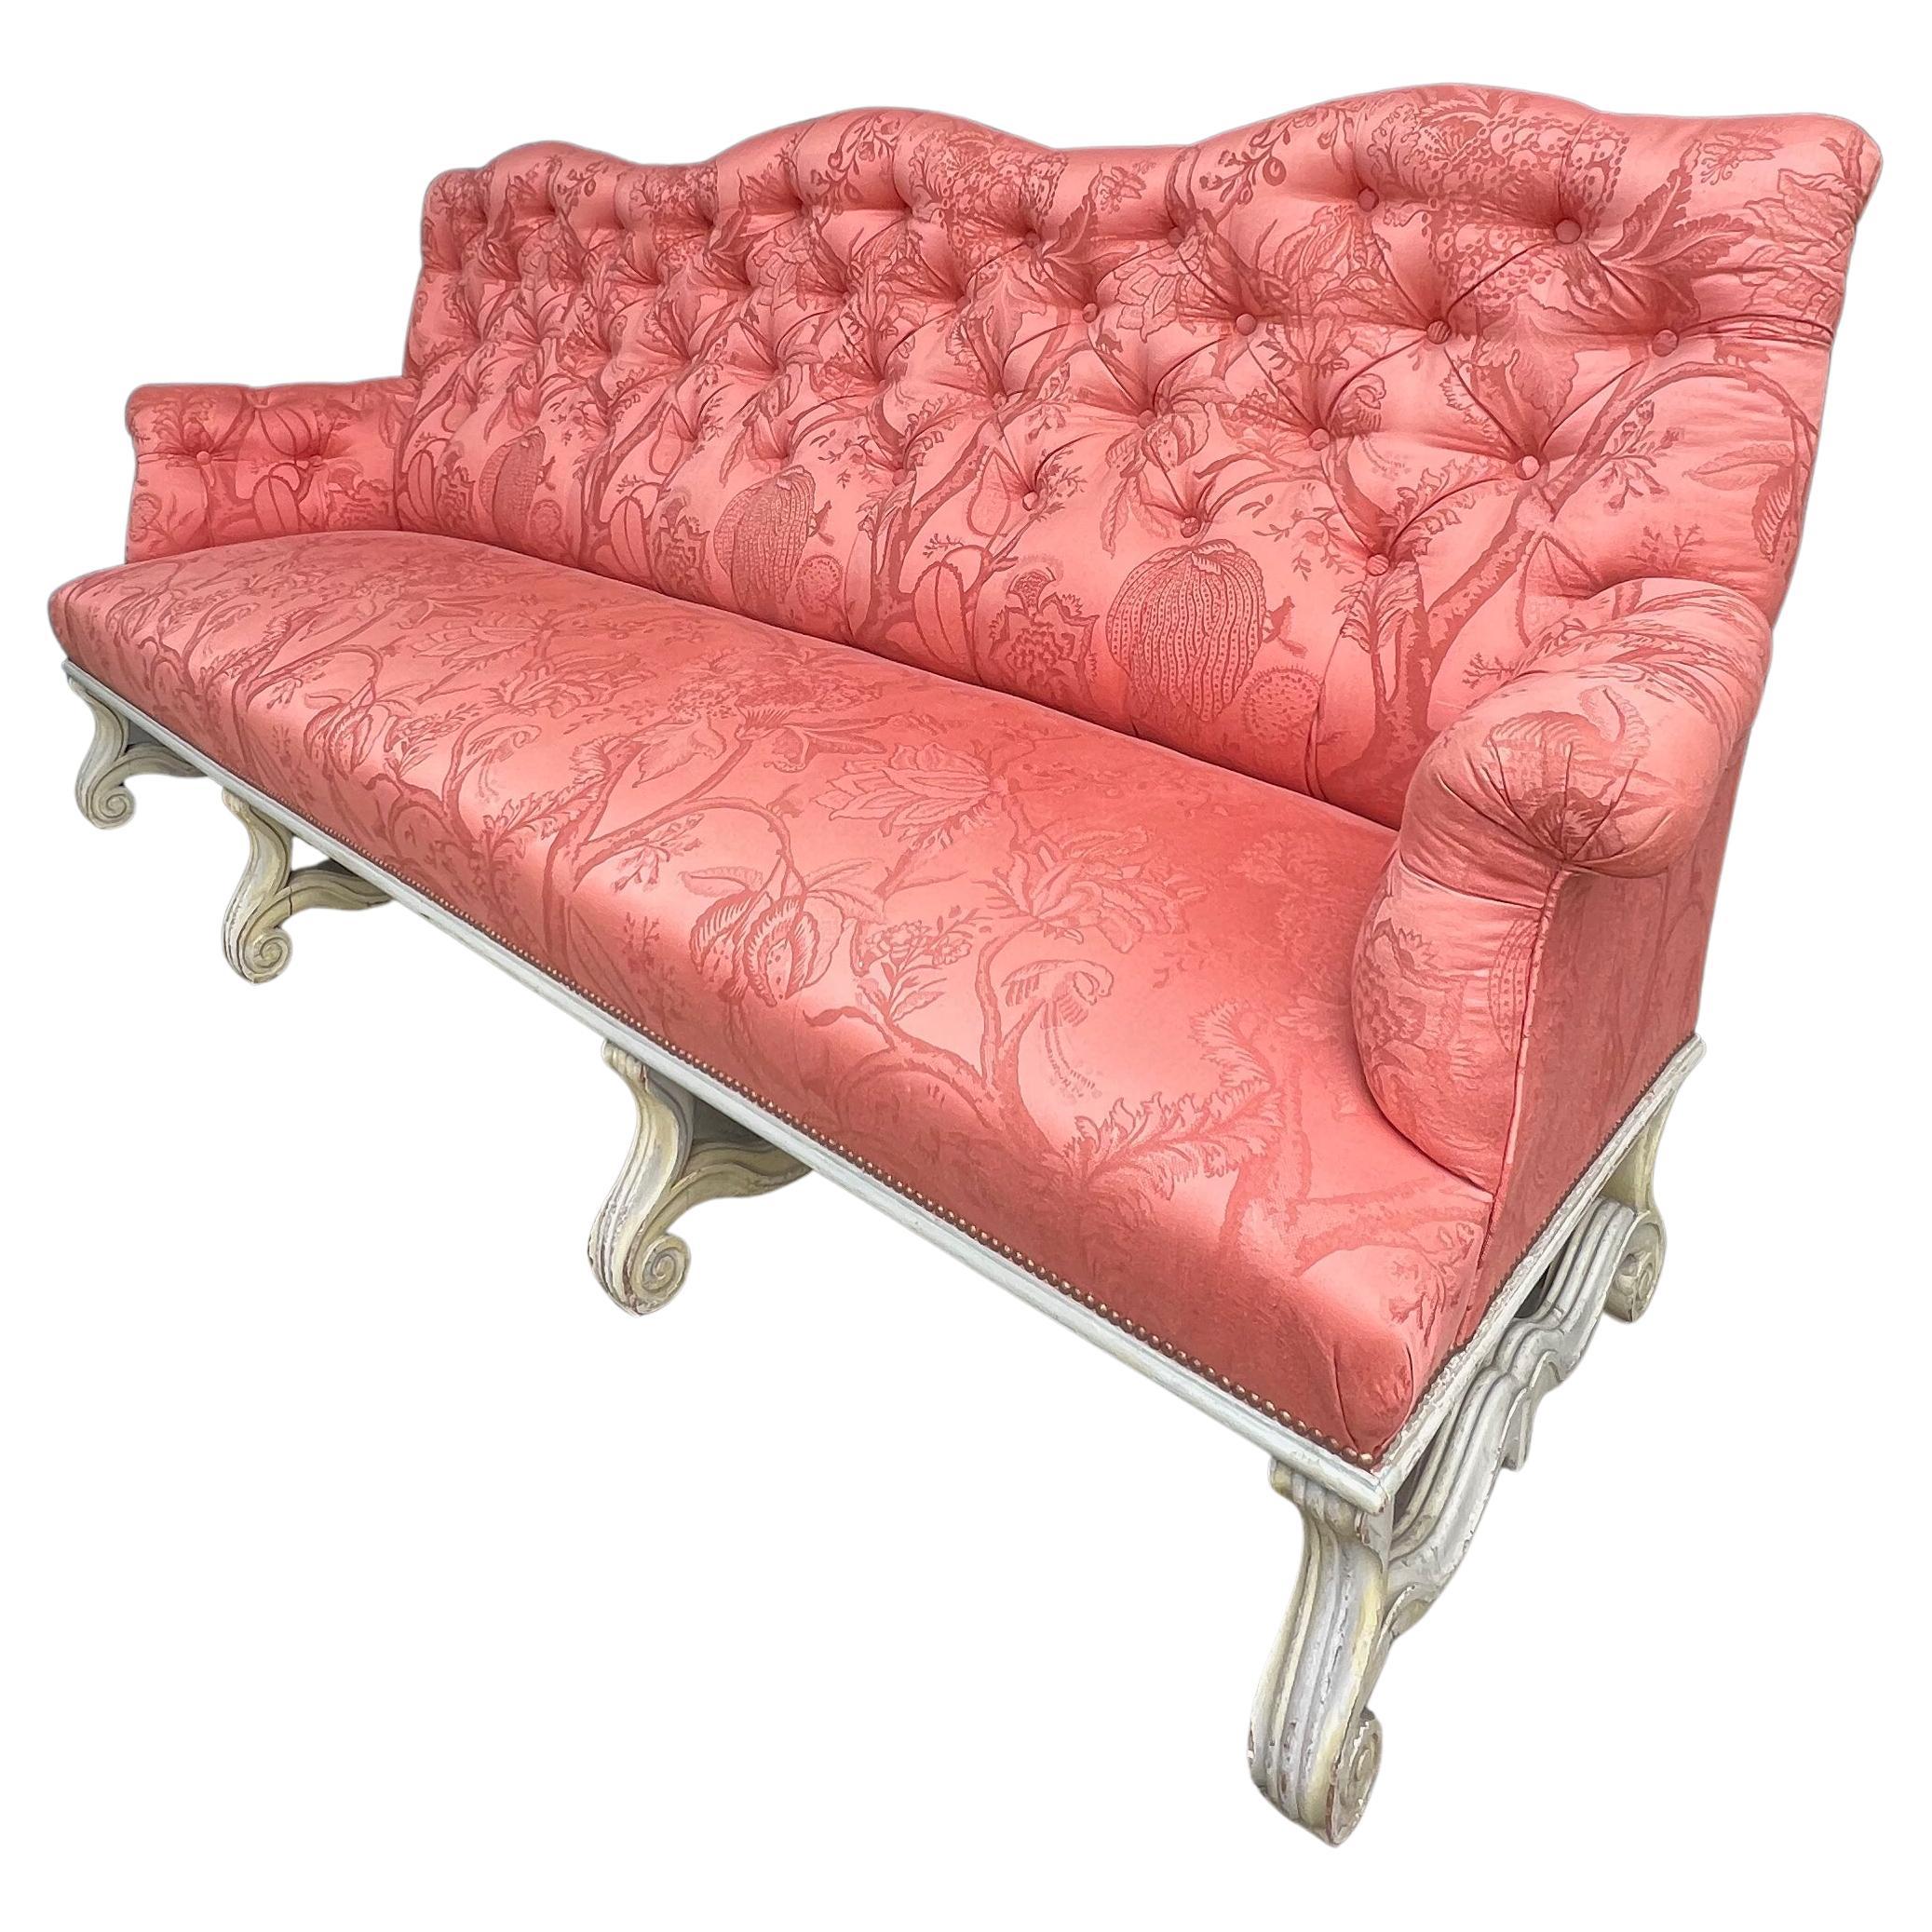 Large French Neo-Baroque Style Sofa